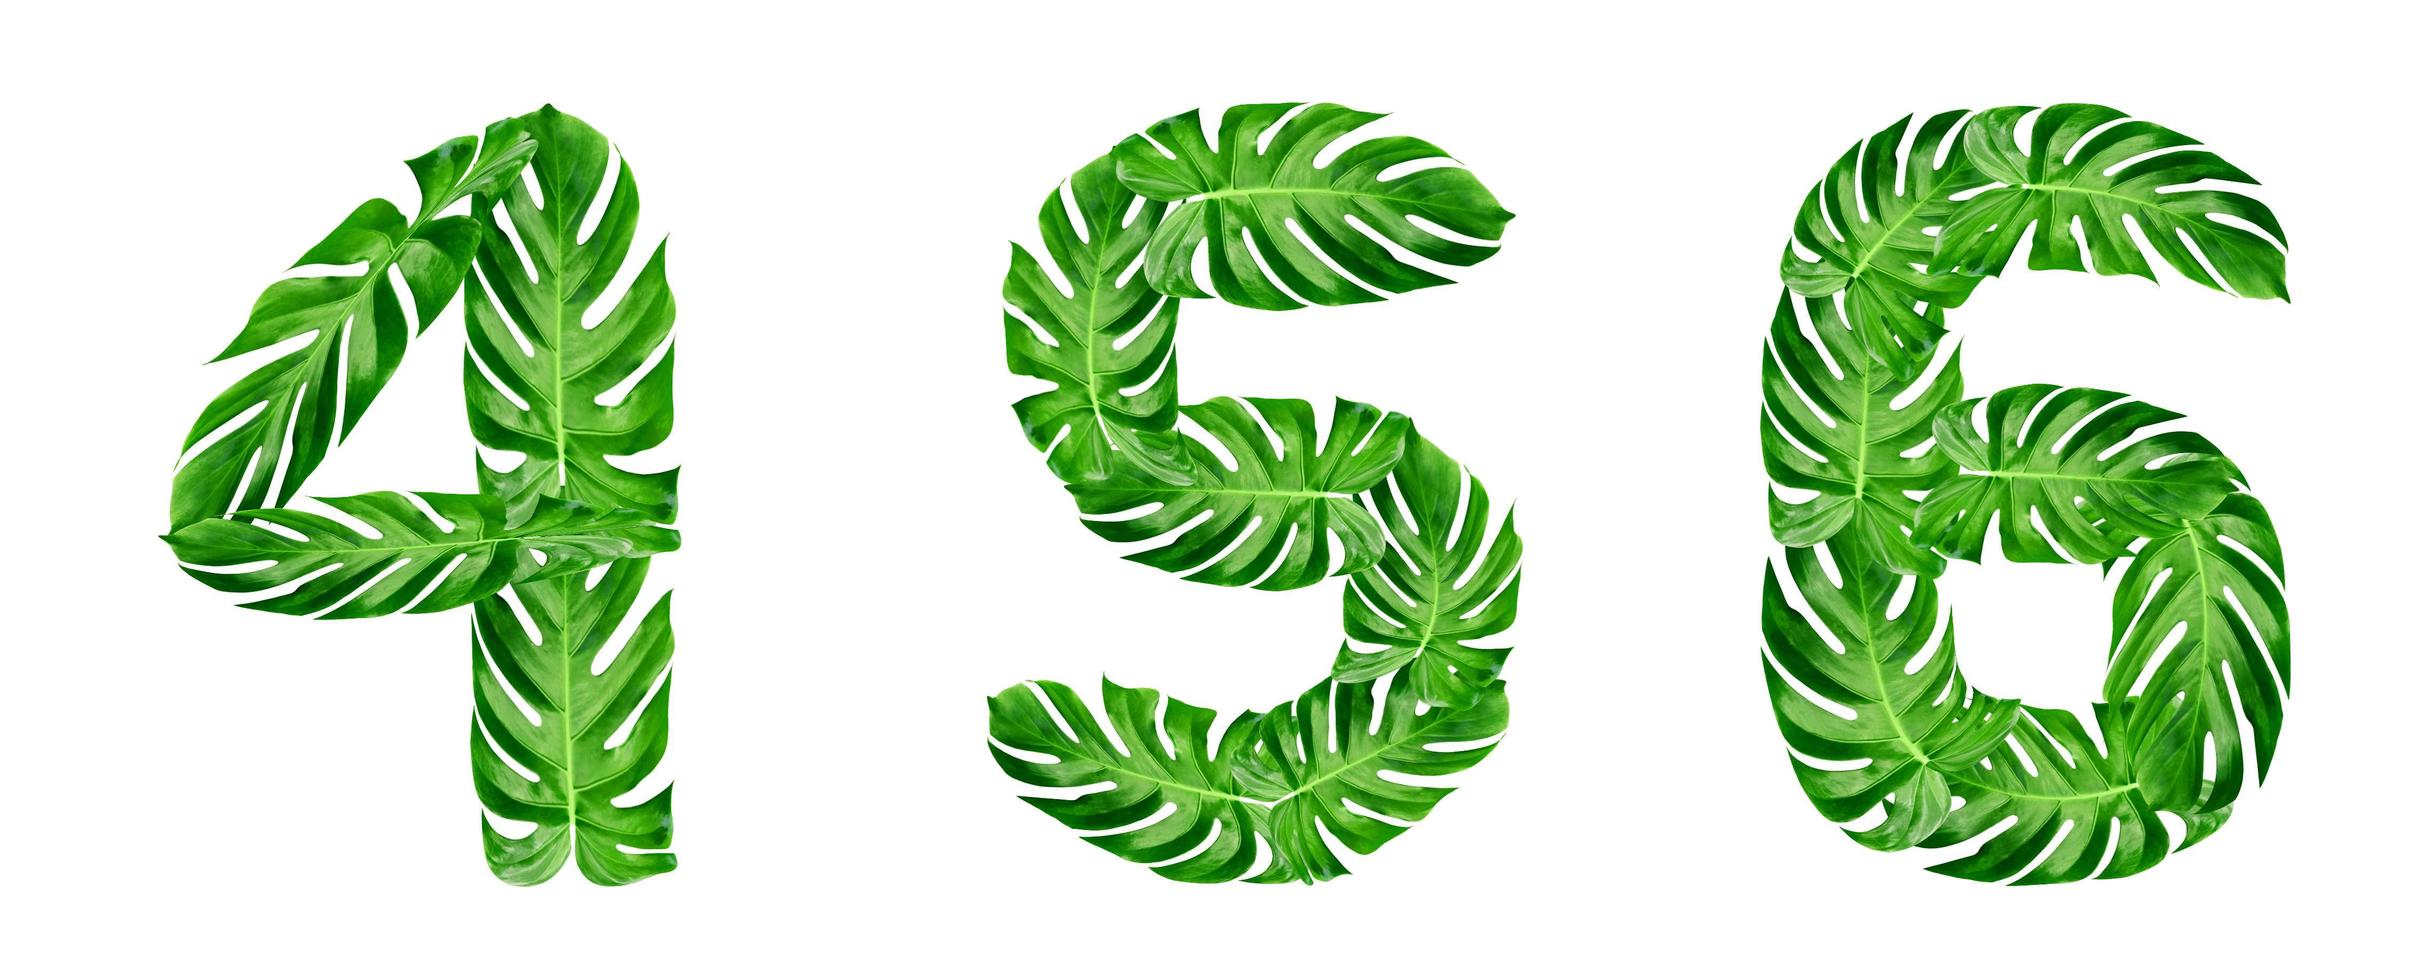 Green leaves pattern,font Alphabet 4,5,6  of leaf monstera isolated on white background photo